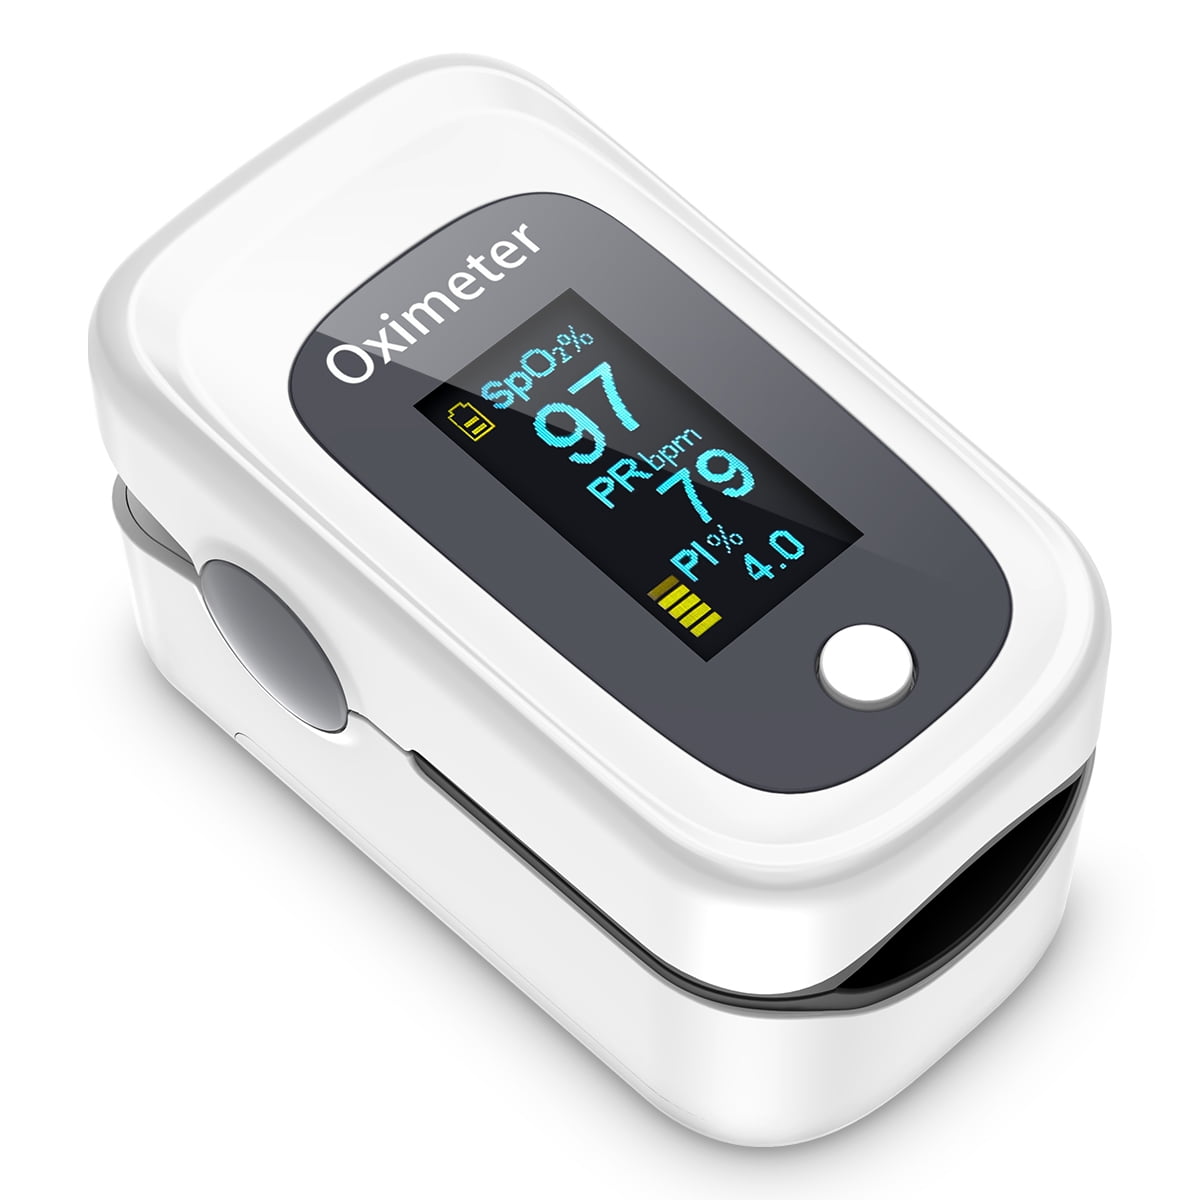 Fingertip Oximeter Blood Measure Oxygen Saturation Monitor, FDA Approved Pulse PR Heart Rate Monitors and Spo2 Reading Oxygen Meter with Finger Plethysmograph and Perfusion Indicator 